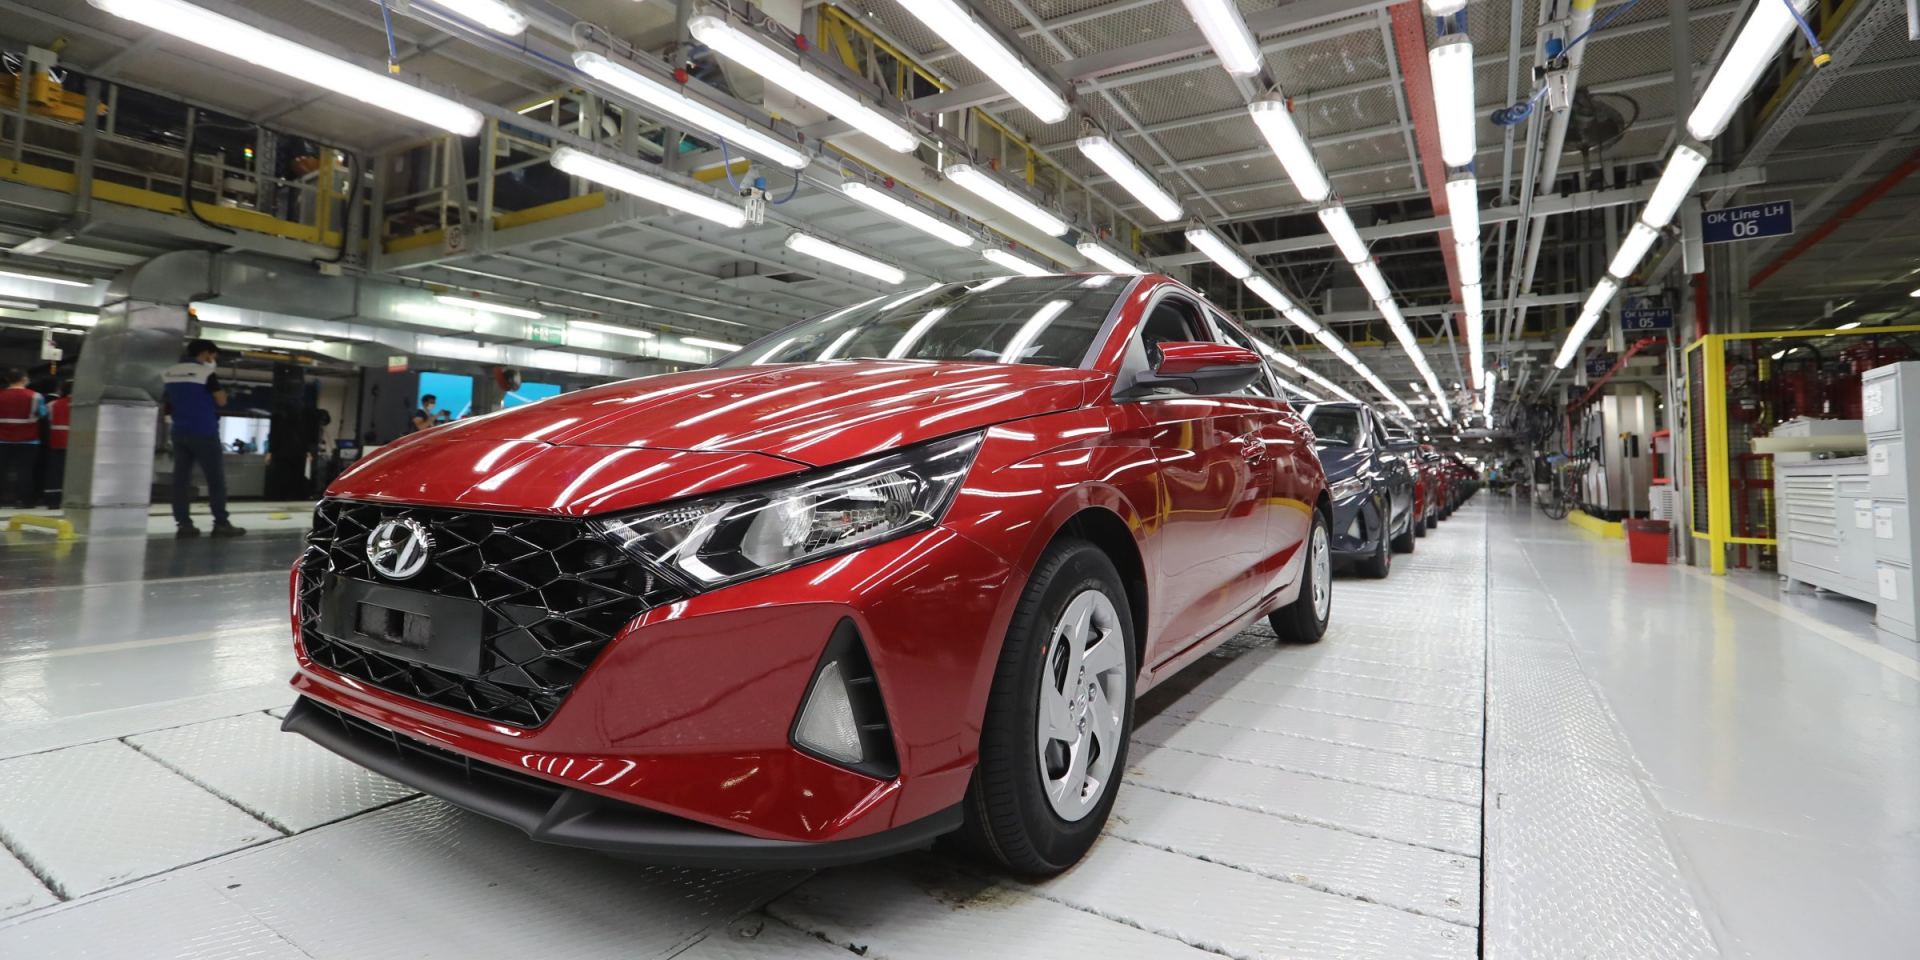 Hyundai to acquire Turkish Kibar Group’s shares in joint factory